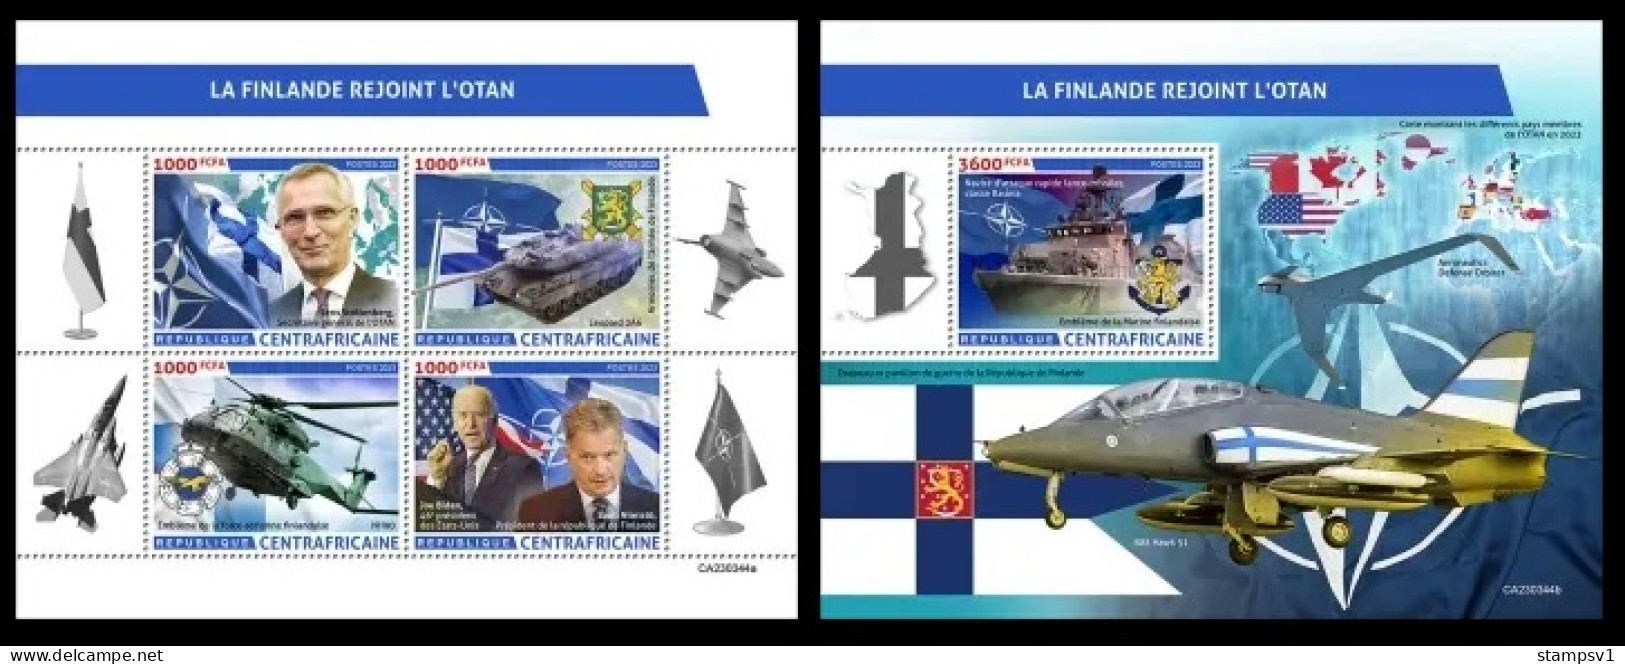 Central Africa 2023 Finland Joins NATO. (344) OFFICIAL ISSUE - NAVO